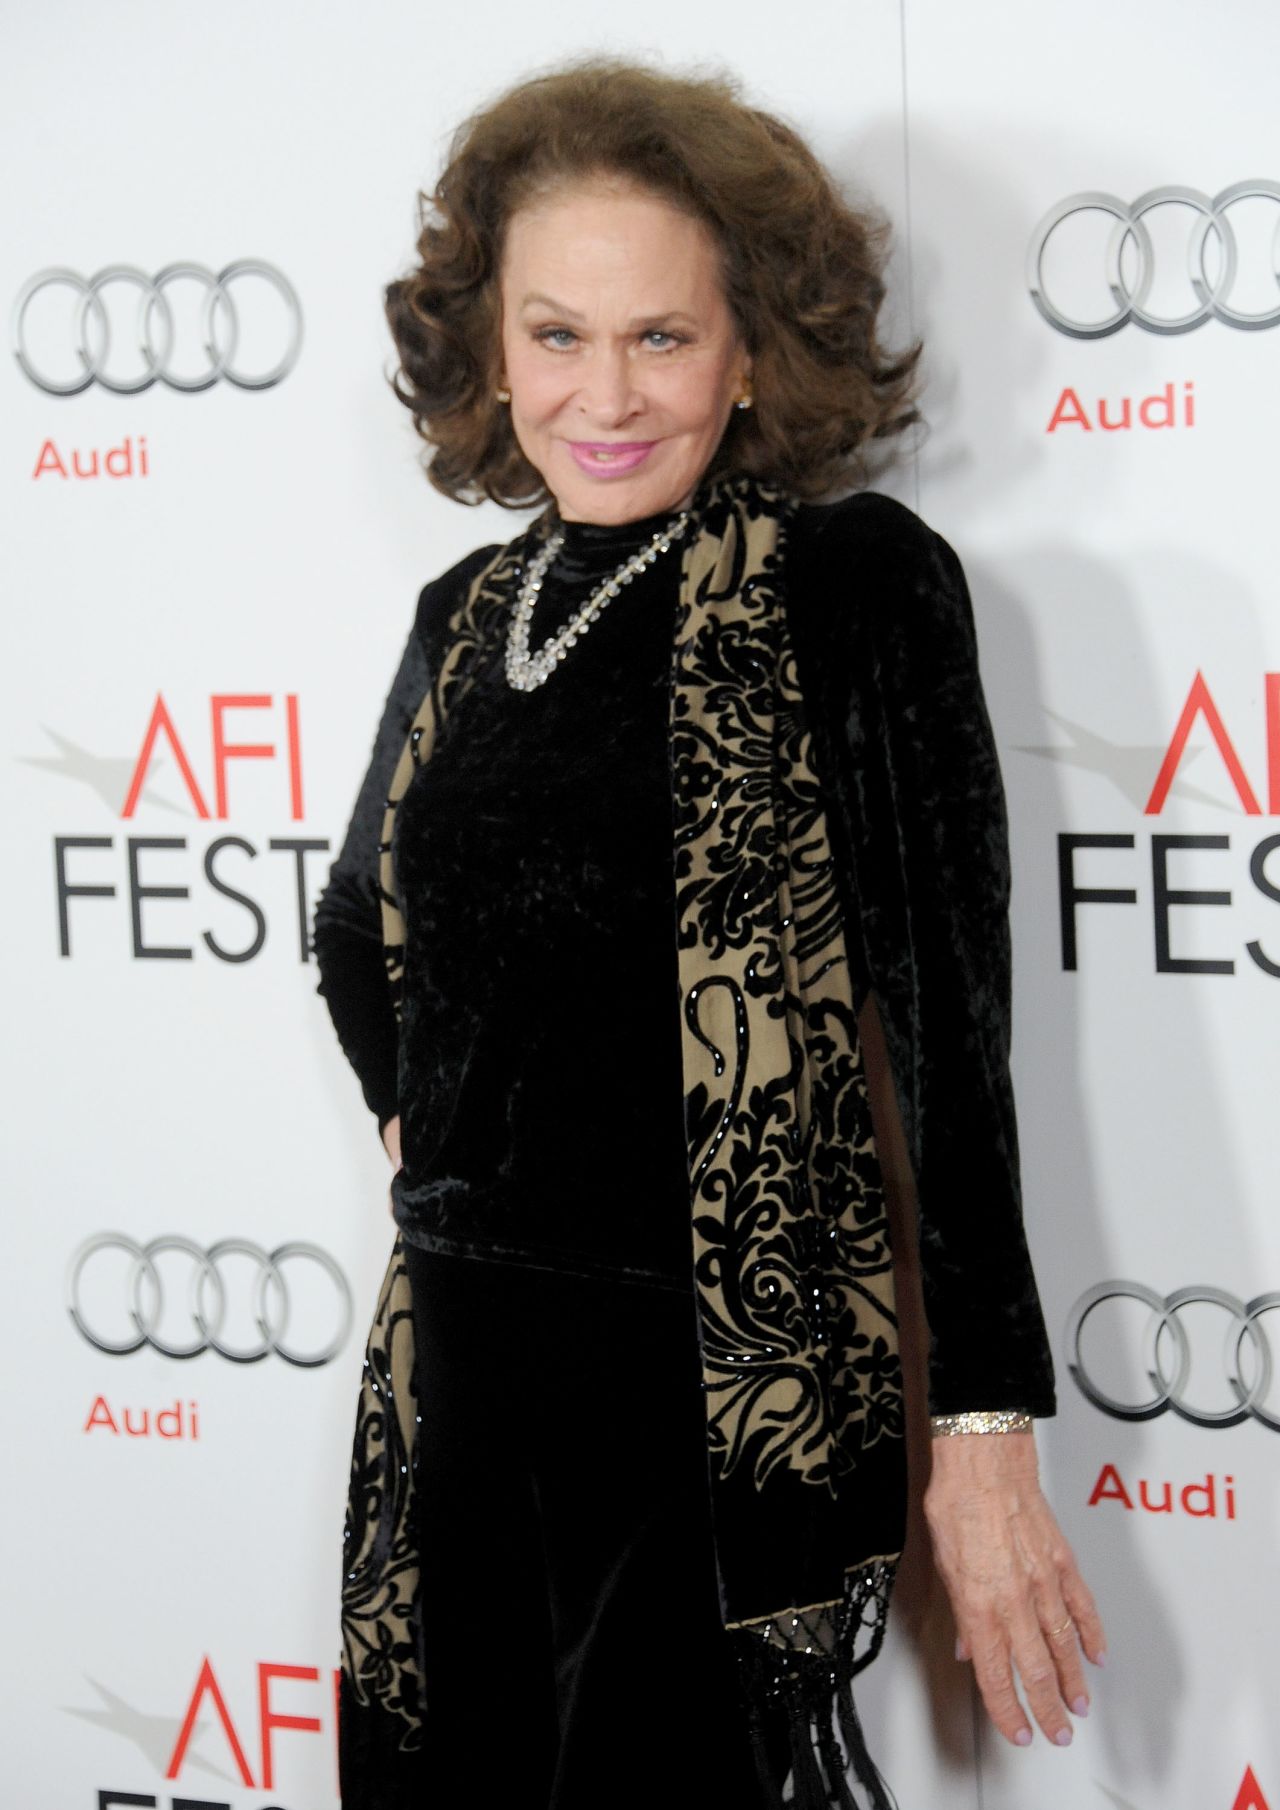 Black arrives at the opening night gala premiere of "Hitchcock" during the 2012 AFI Fest at Grauman's Chinese Theatre.